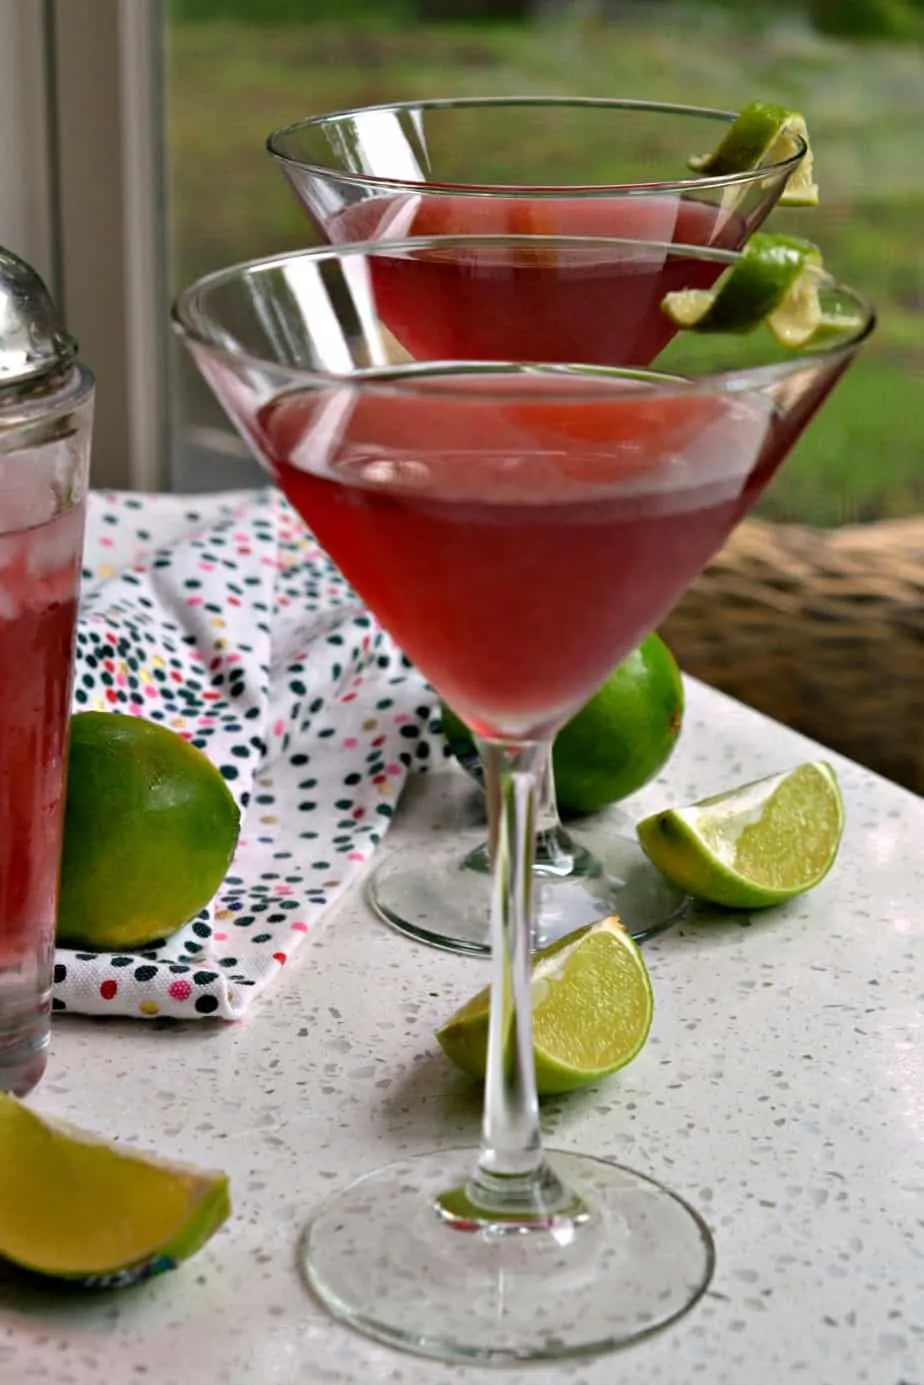 This gorgeous and tasty Cosmopolitan Drink is one of my favorite cocktails.